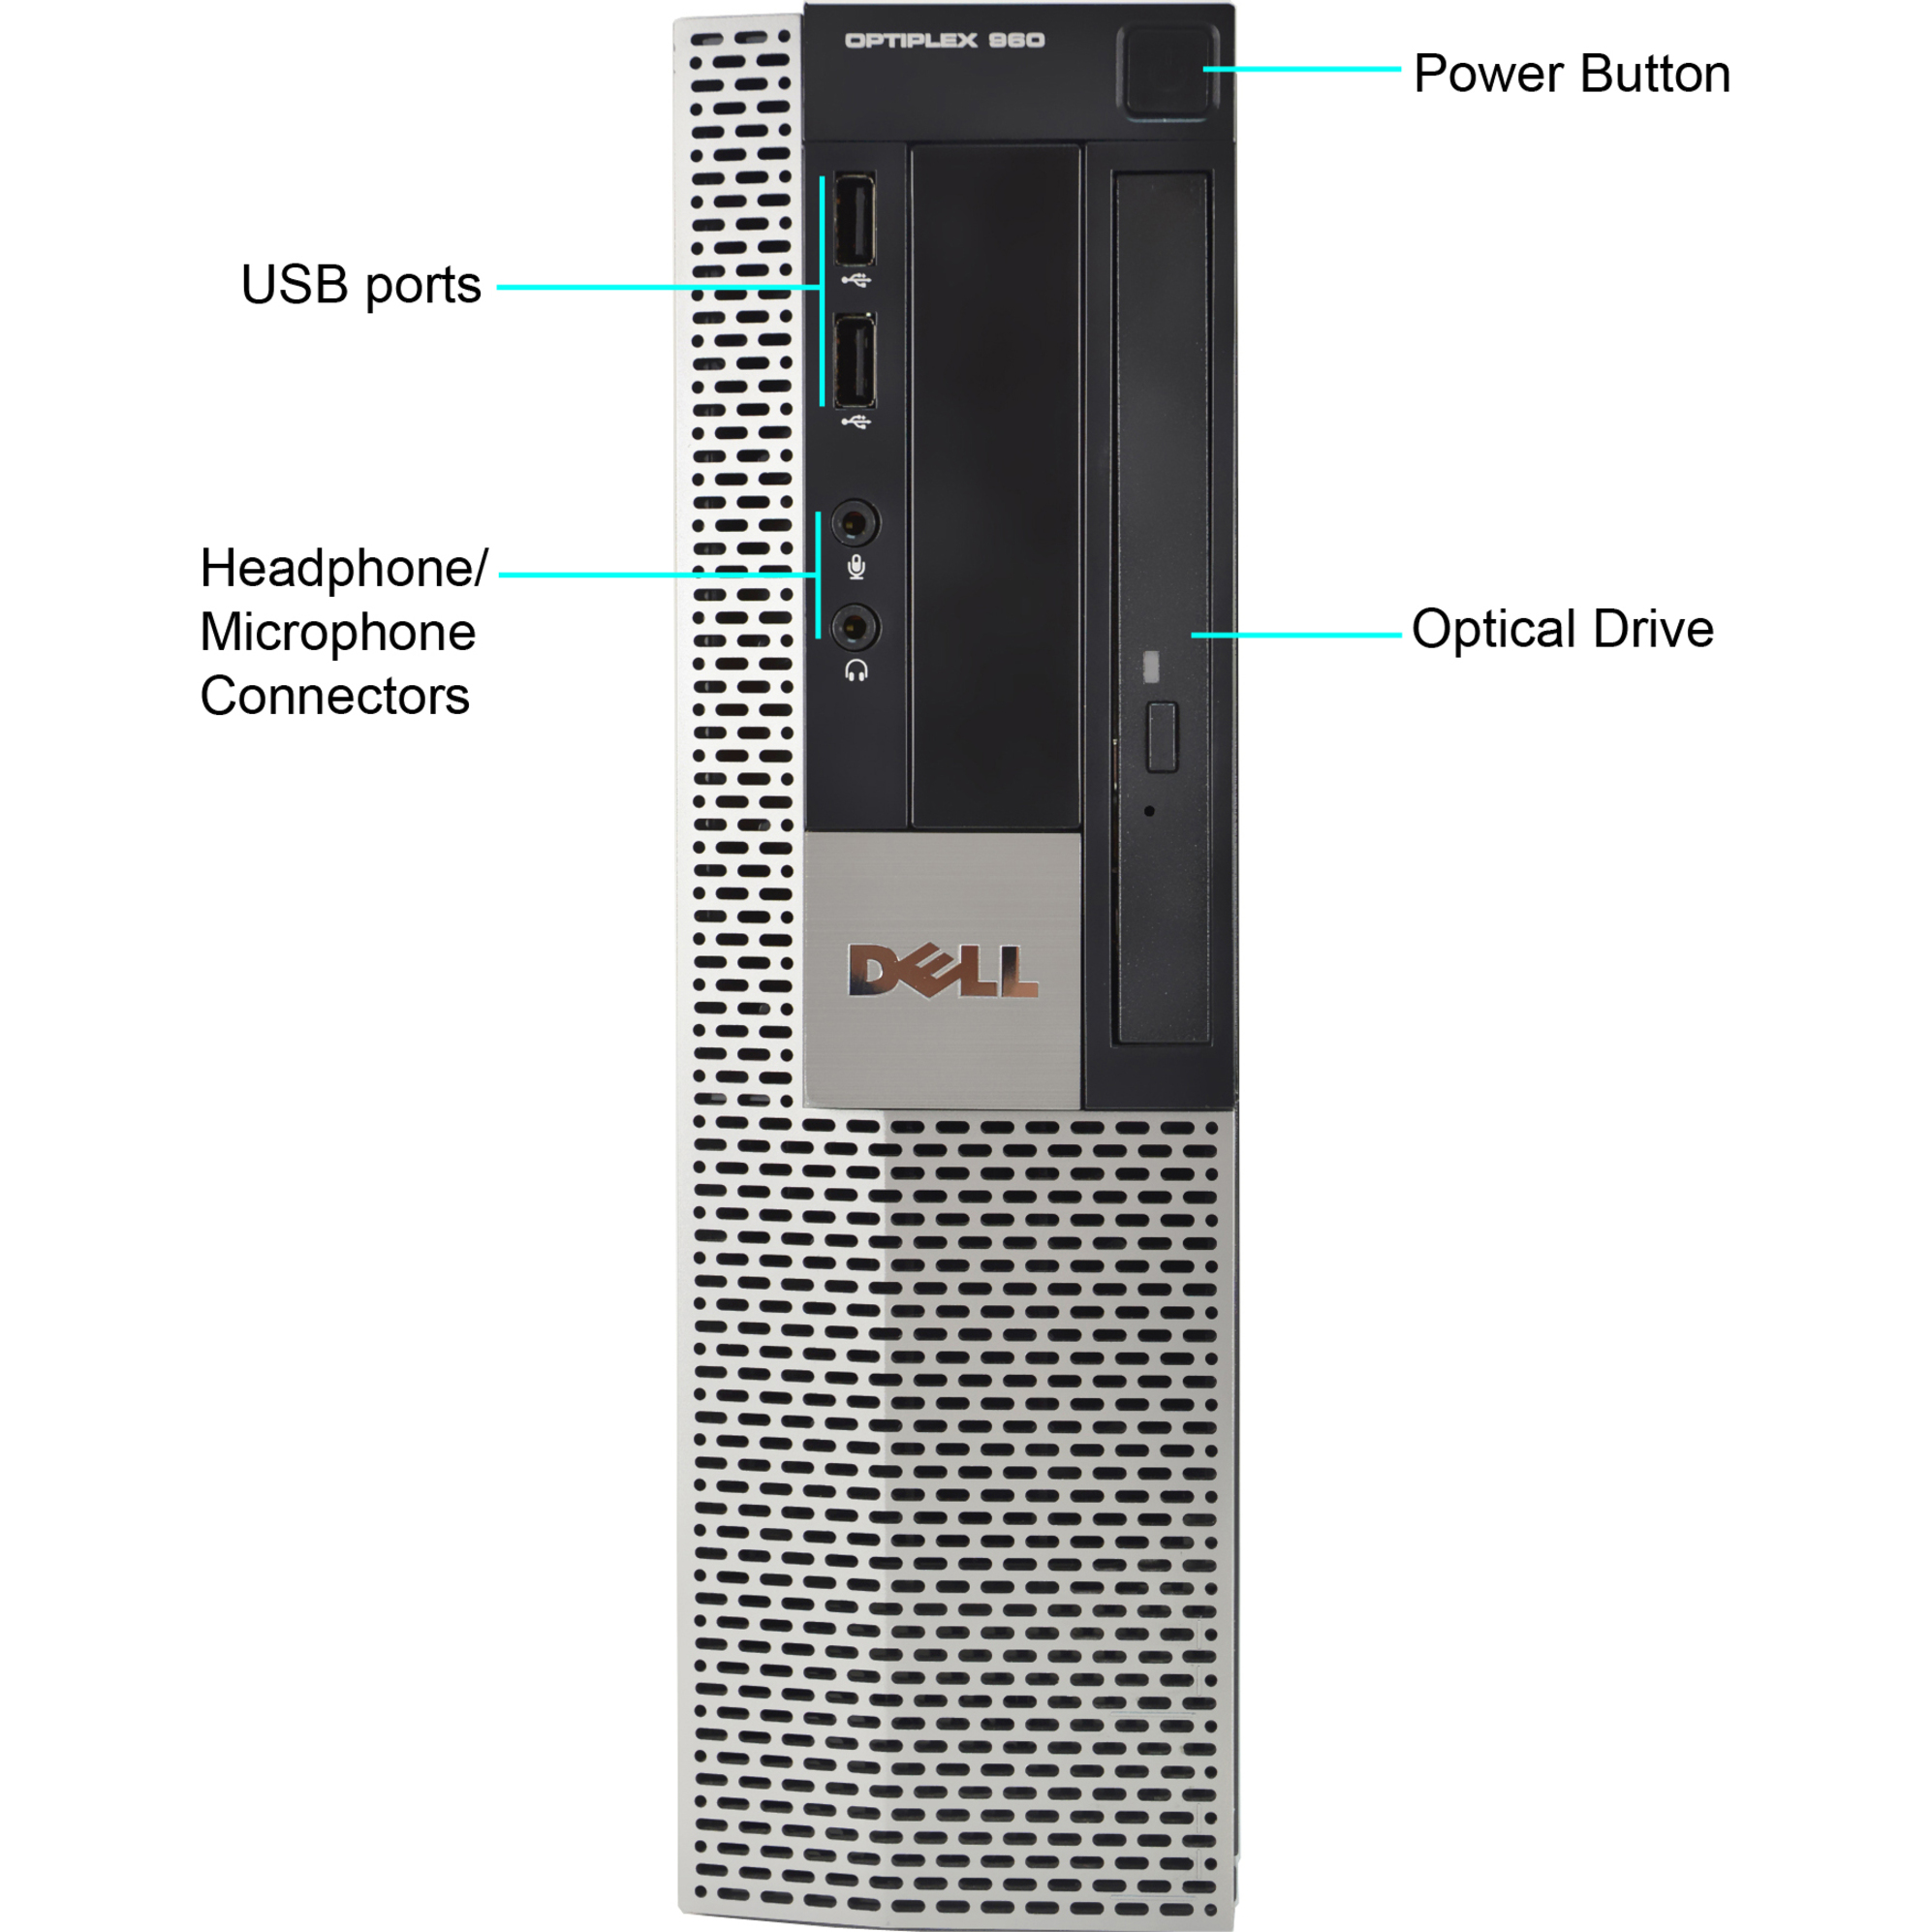 Restored Dell Optiplex 960-D WA1-0373 Desktop PC with Intel Core 2 Duo Processor, 4GB Memory, 250GB Hard Drive and Windows 10 Pro (Monitor Not Included) (Refurbished) - image 2 of 3